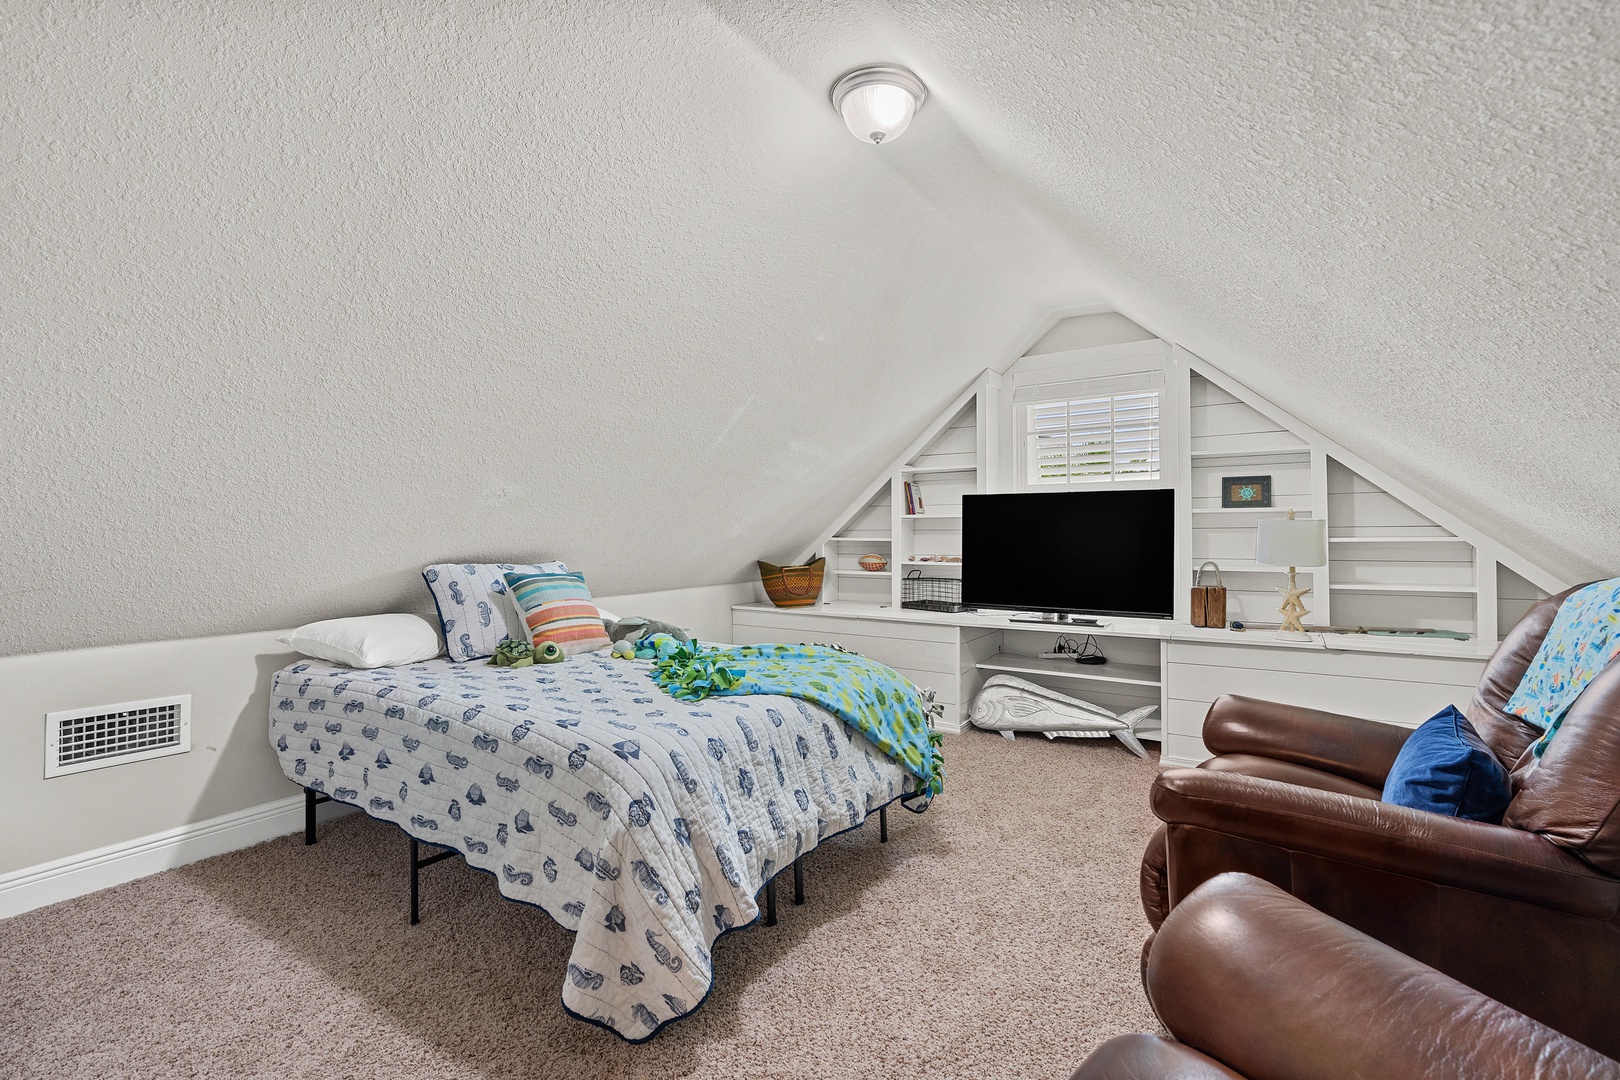 The loft includes a full bed, flat screen TV and leather lounge chairs!